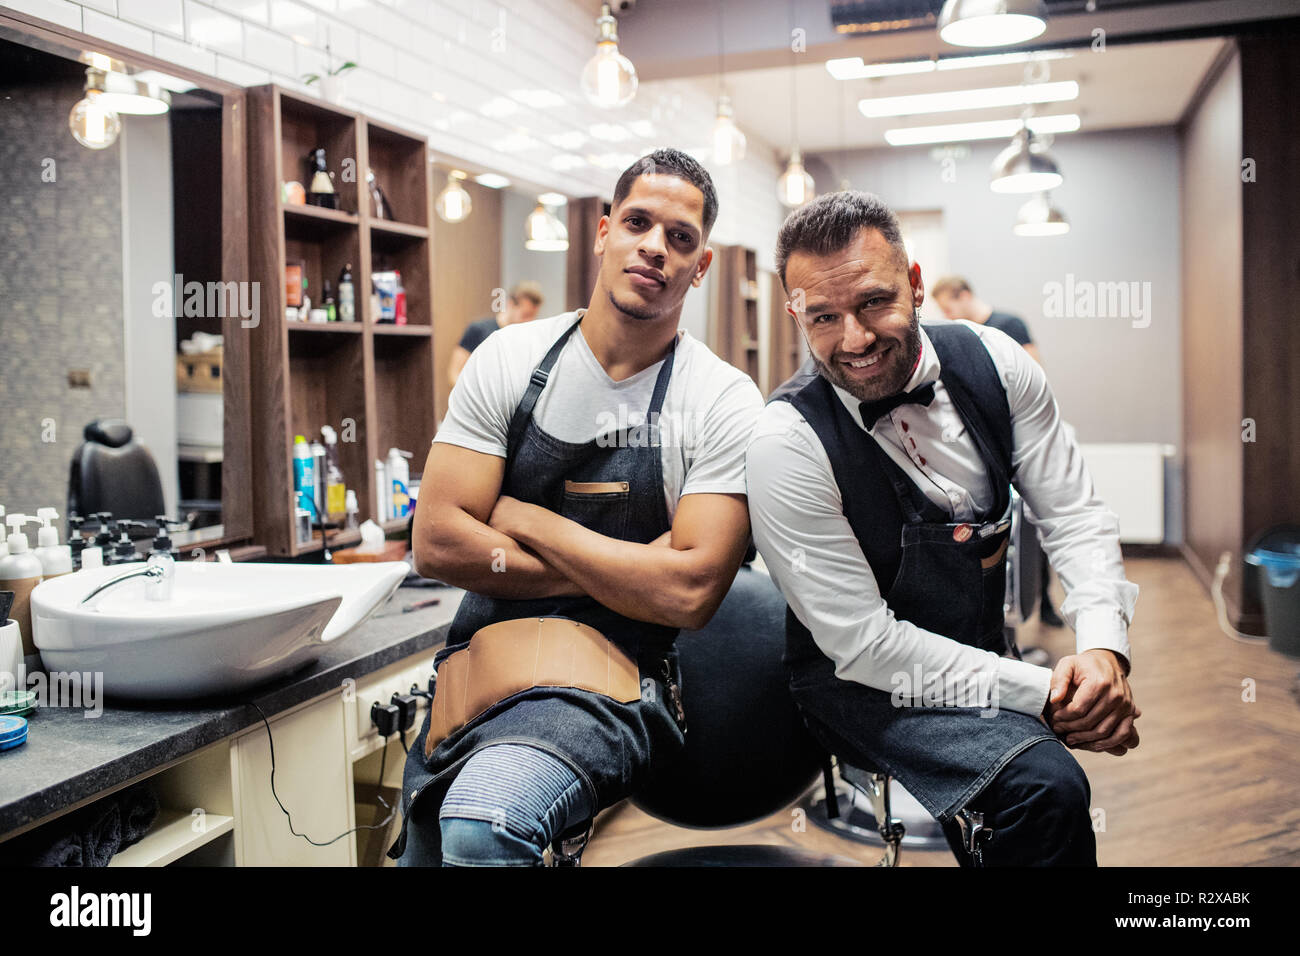 Two male haidressers and hairstylists sitting in barber shop. Stock Photo